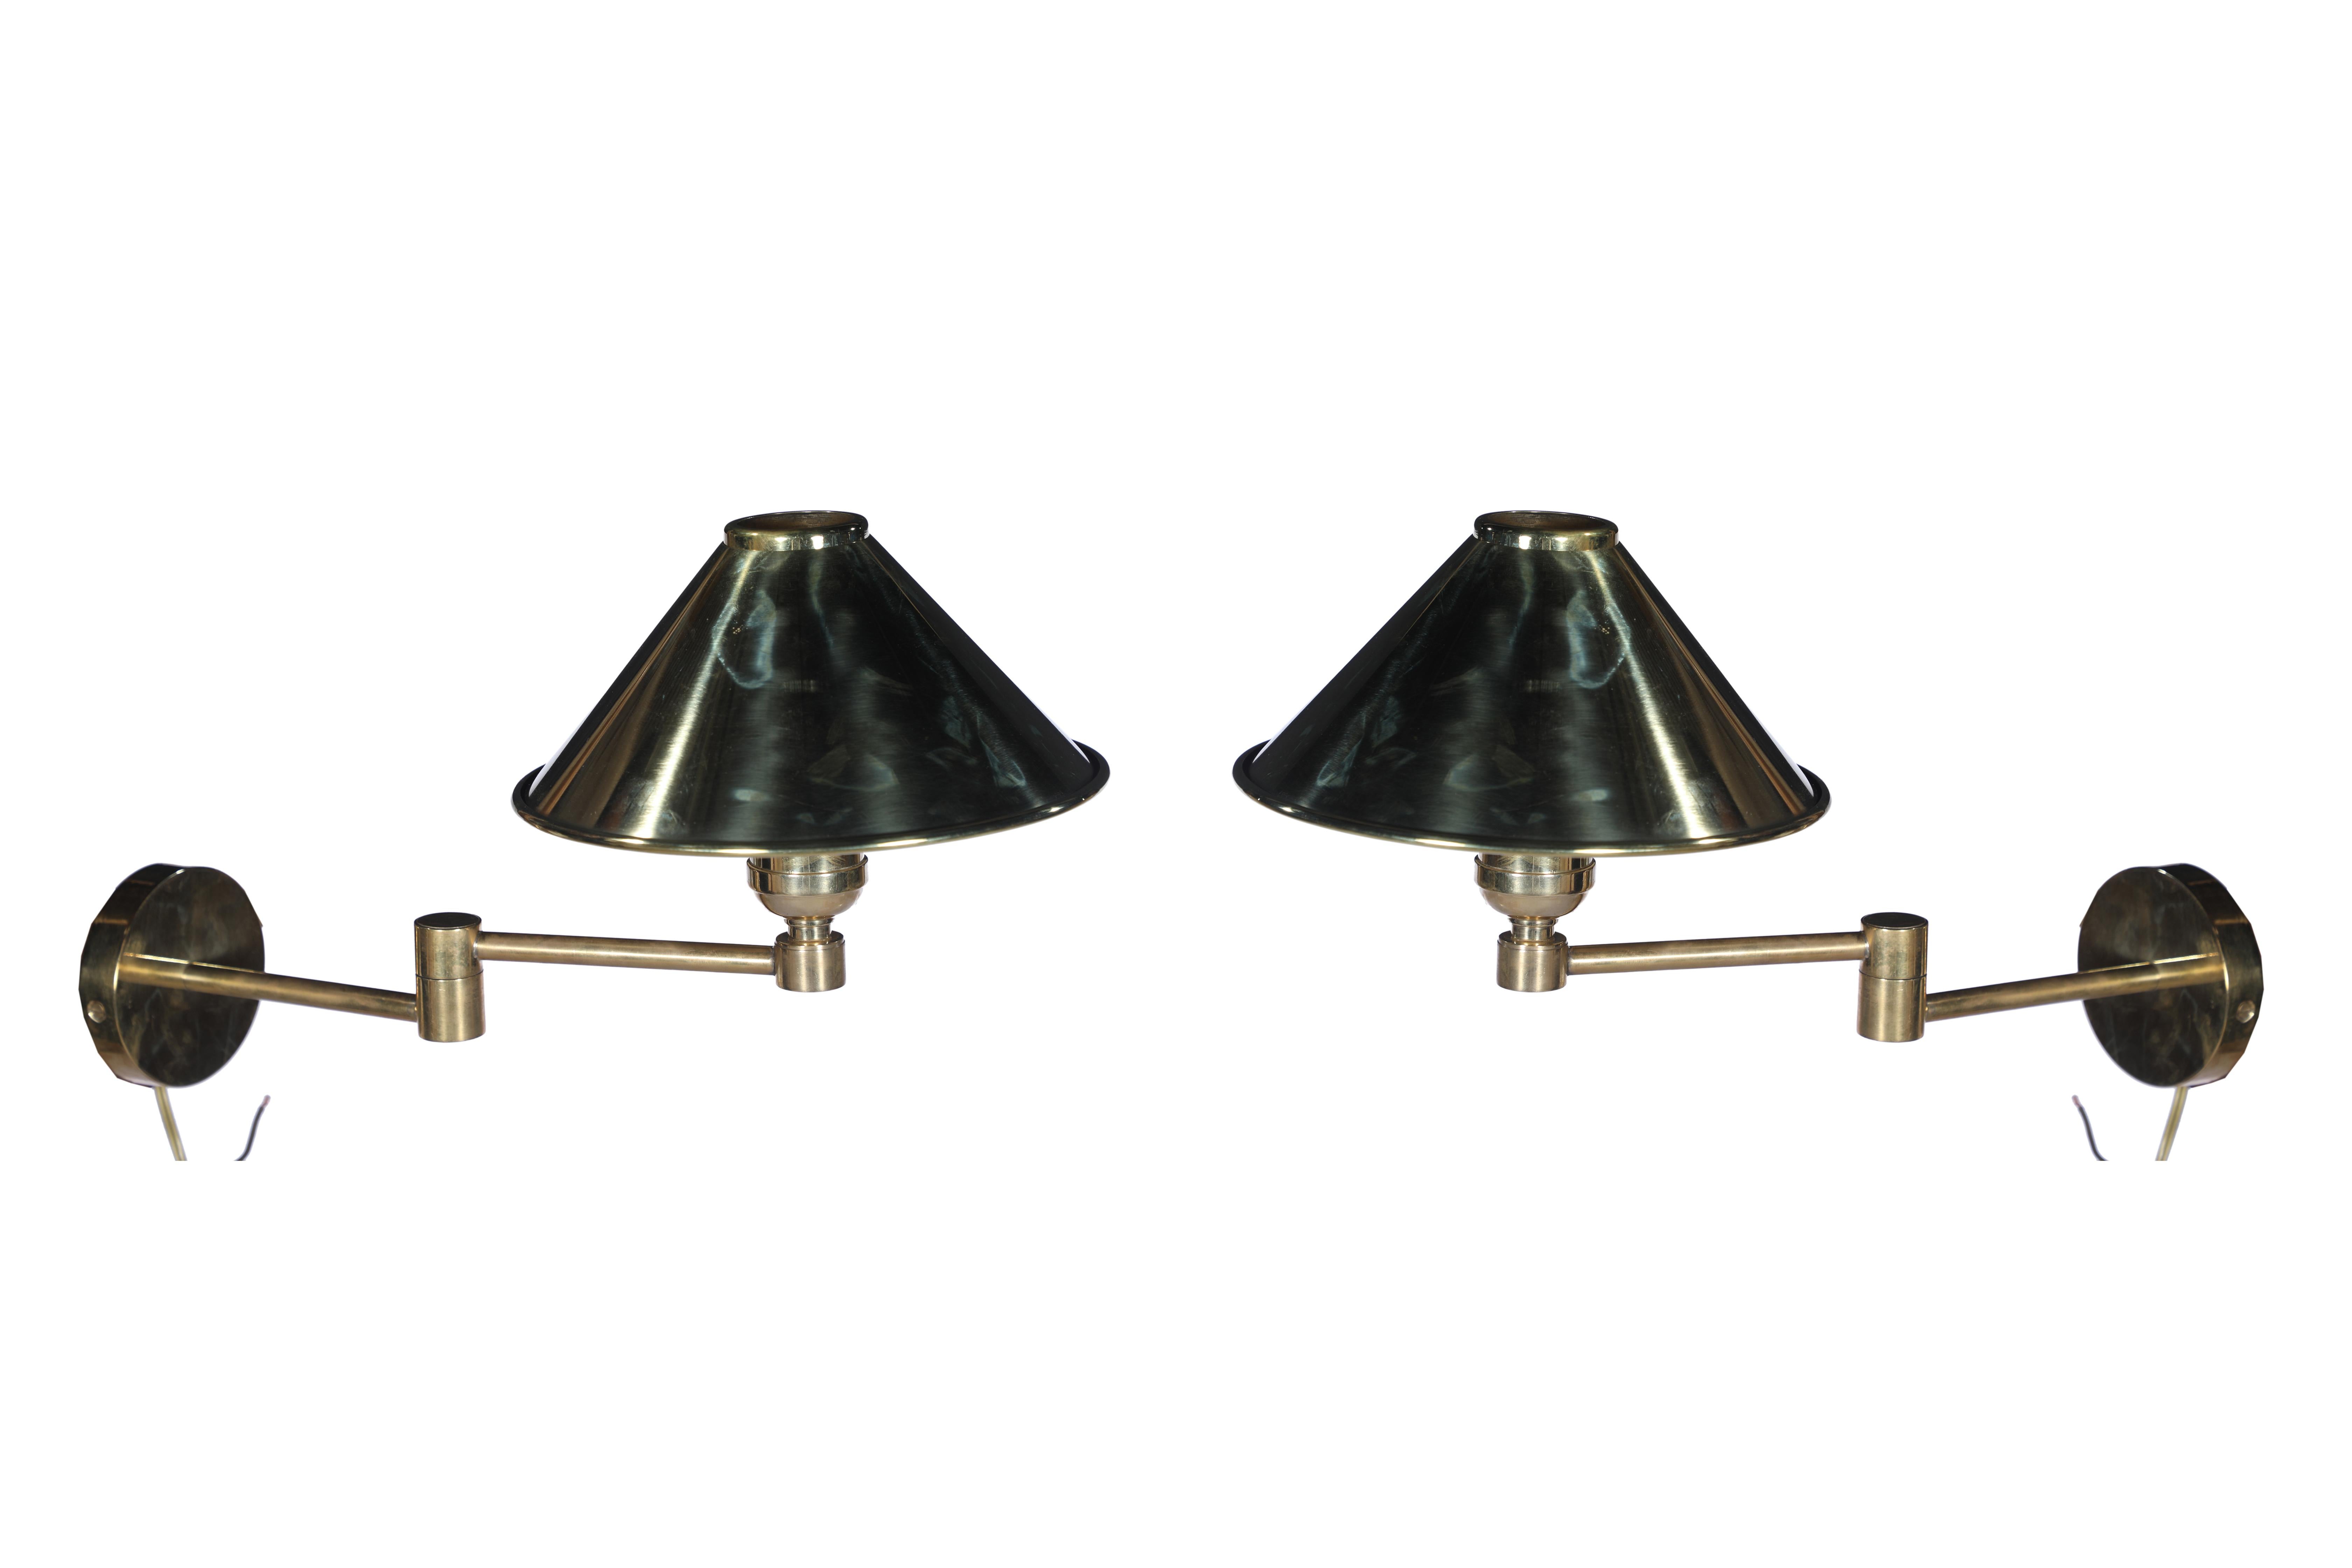 A pair of brass, swing-arm bunk lights from a ship's stateroom. Measures 11